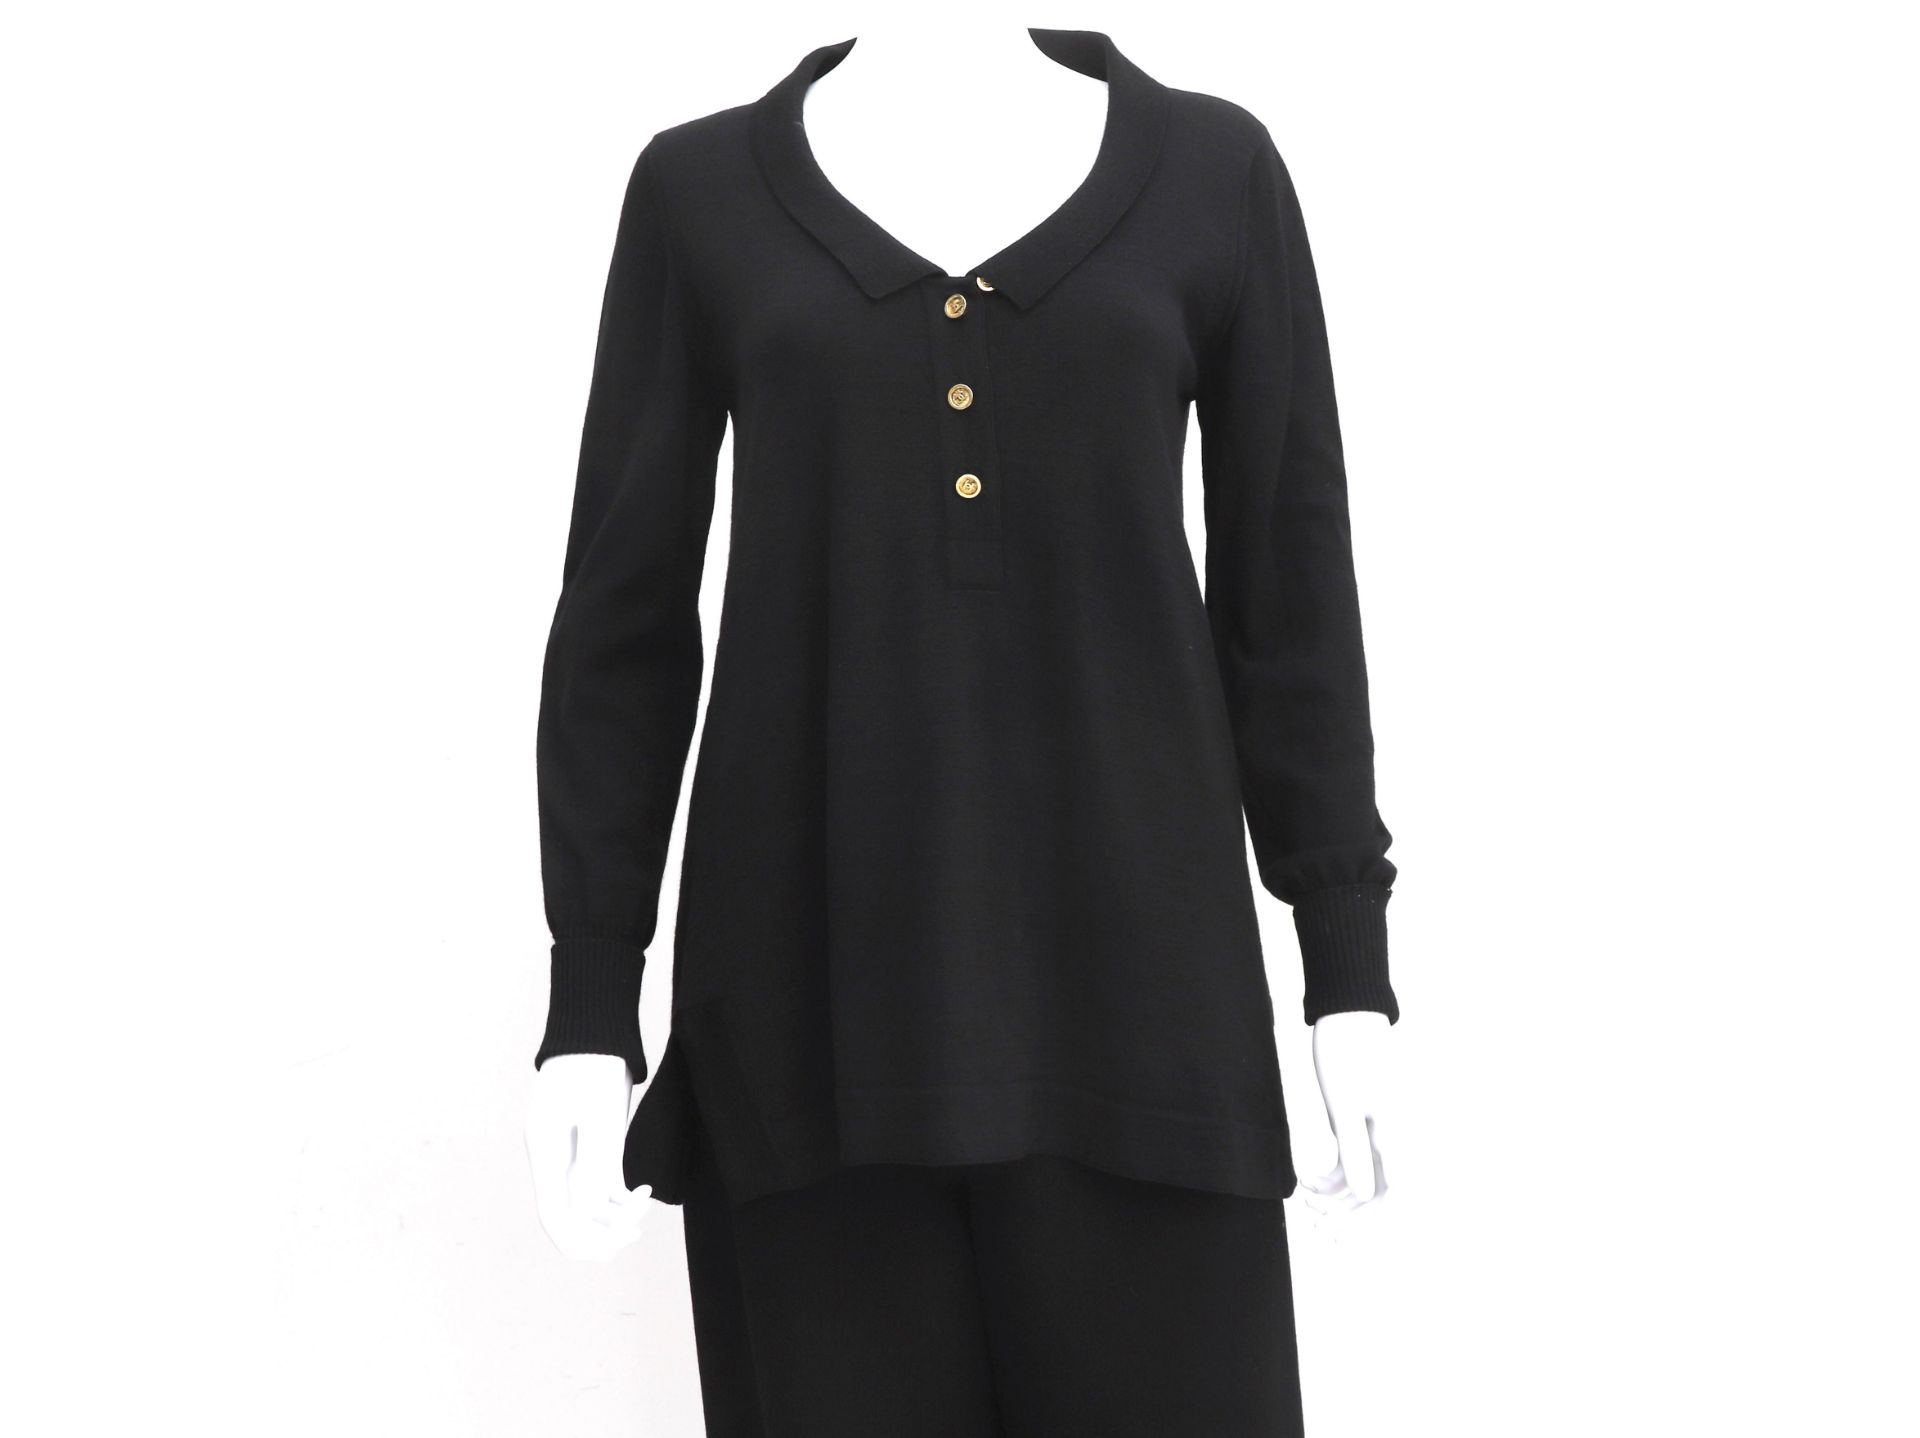 A Chanel Boutique black sweater, polo model. With three gold-coloured CC logo buttons on the